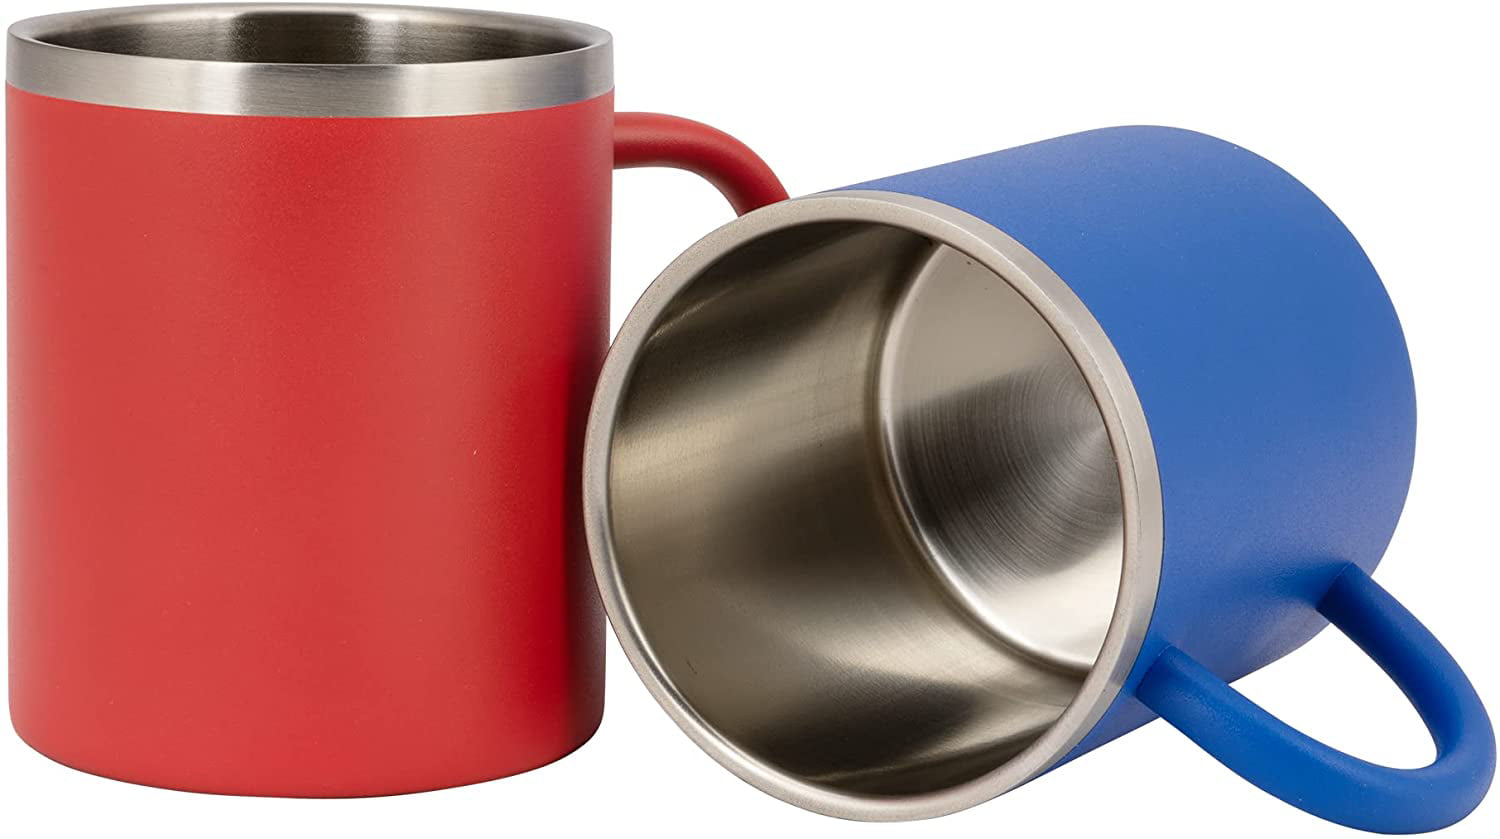 Red Rover Stainless Steel Animal Cups, Set of 4, Kids Unisex, Size: One Size